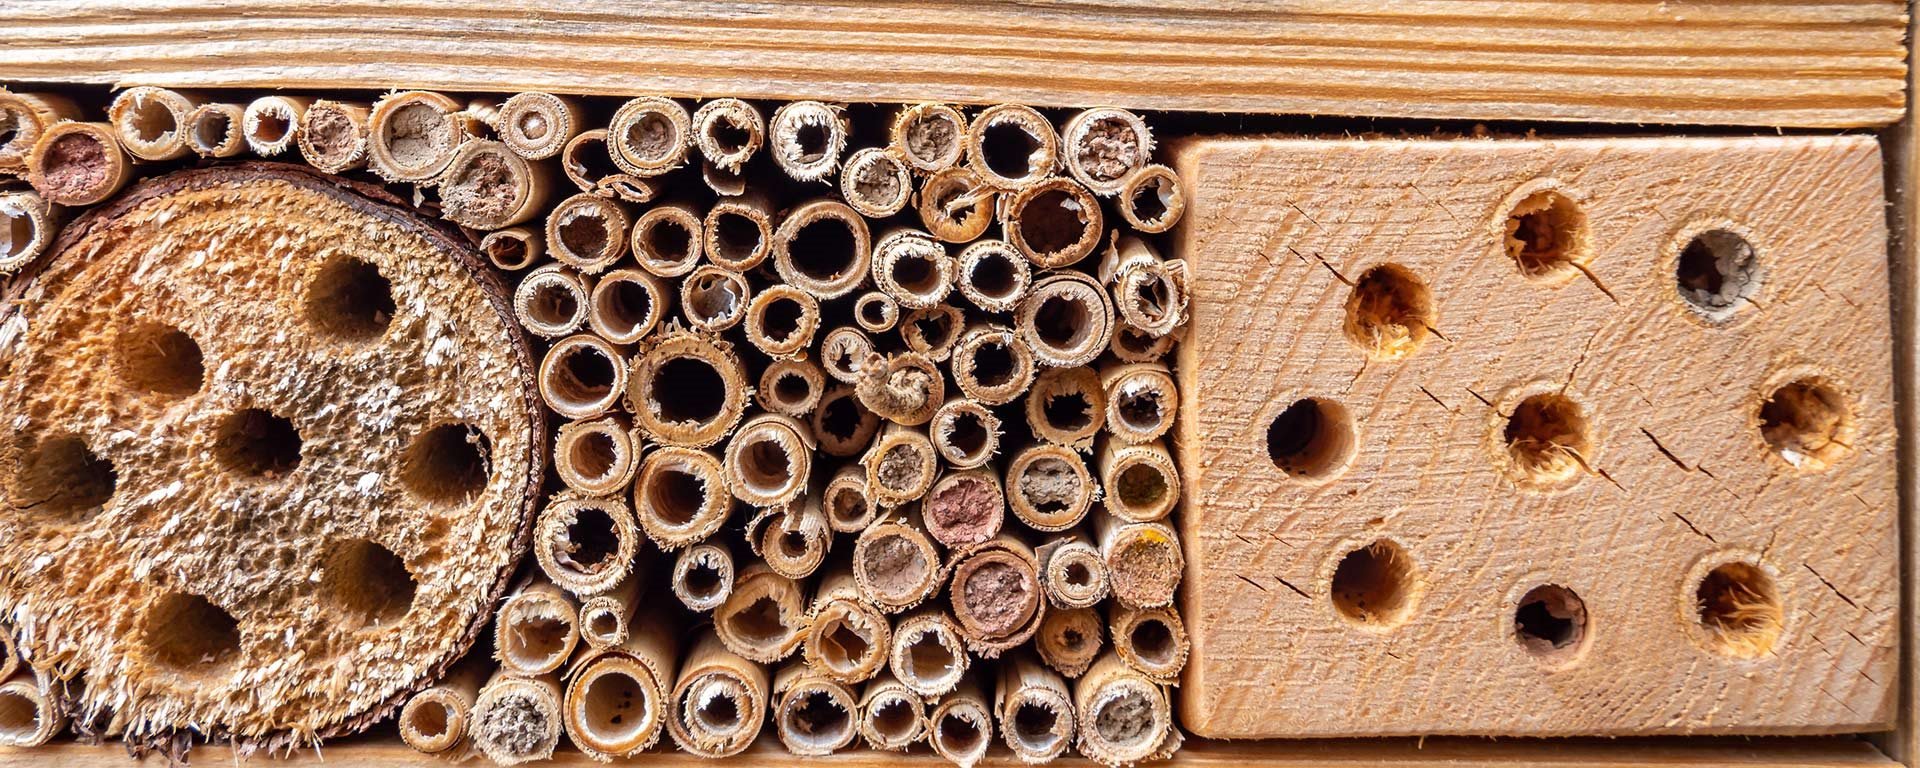 How To Build A Bug Hotel